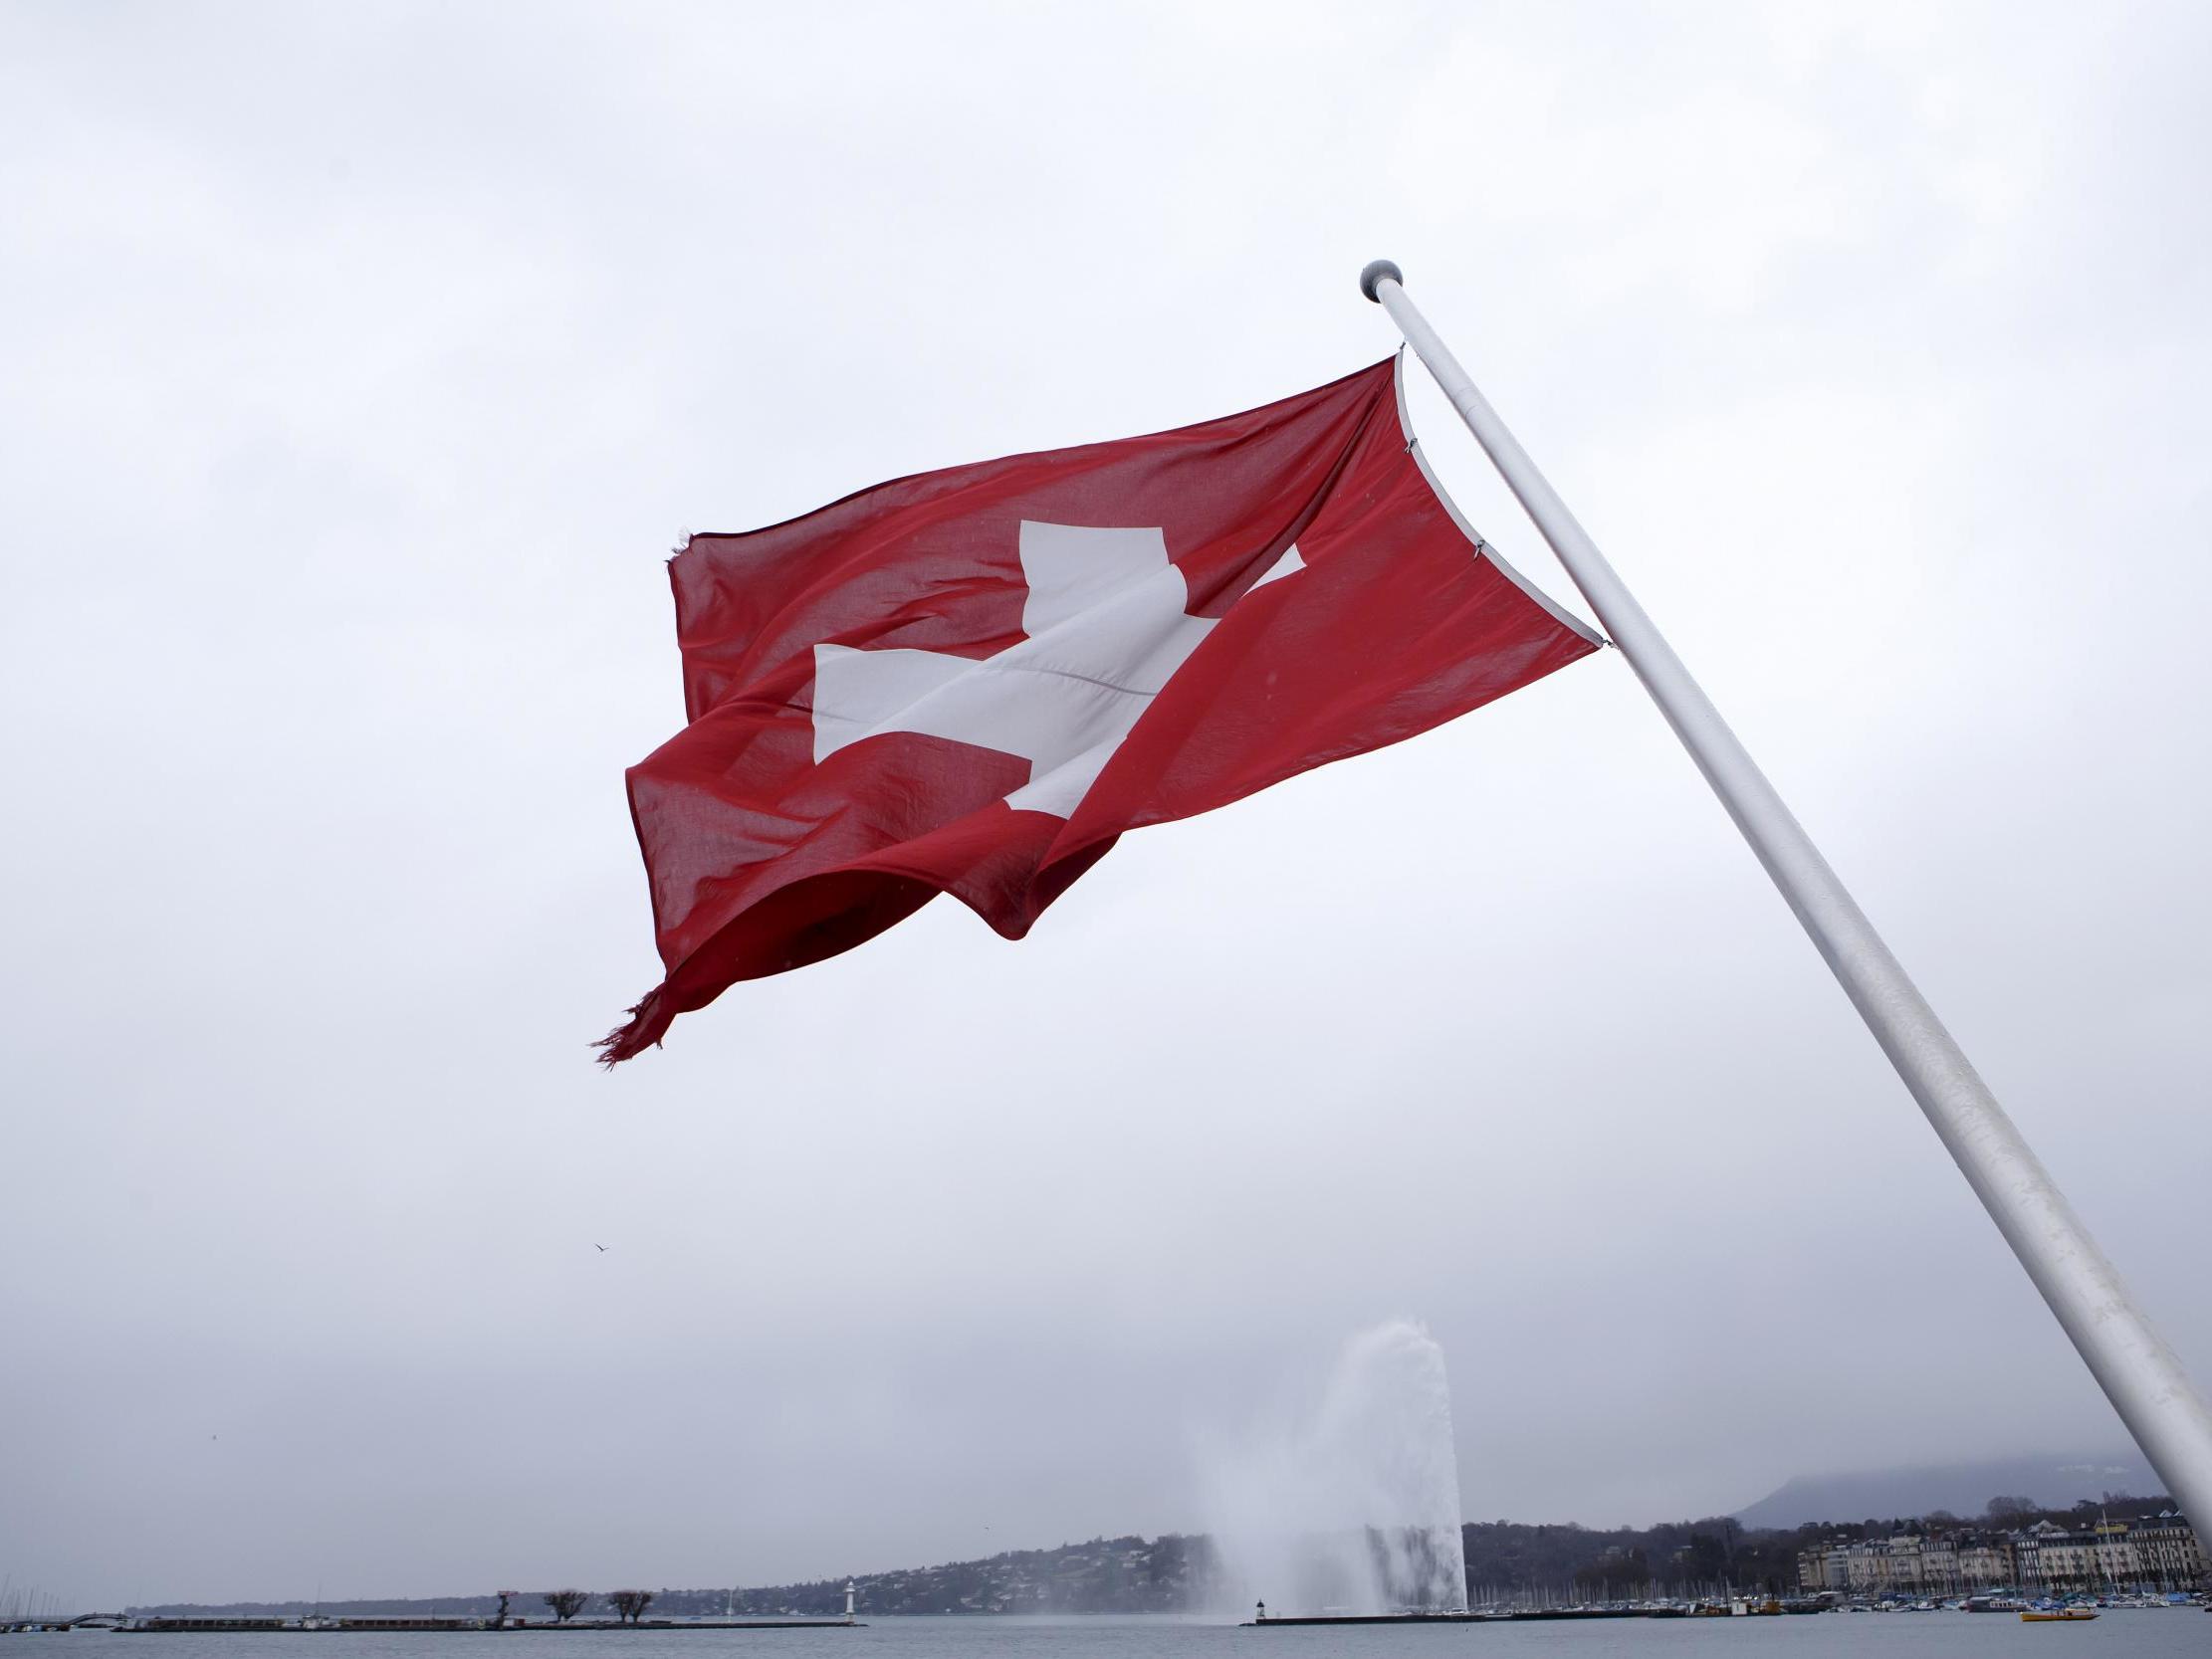 Switzerland is changing its testing rules